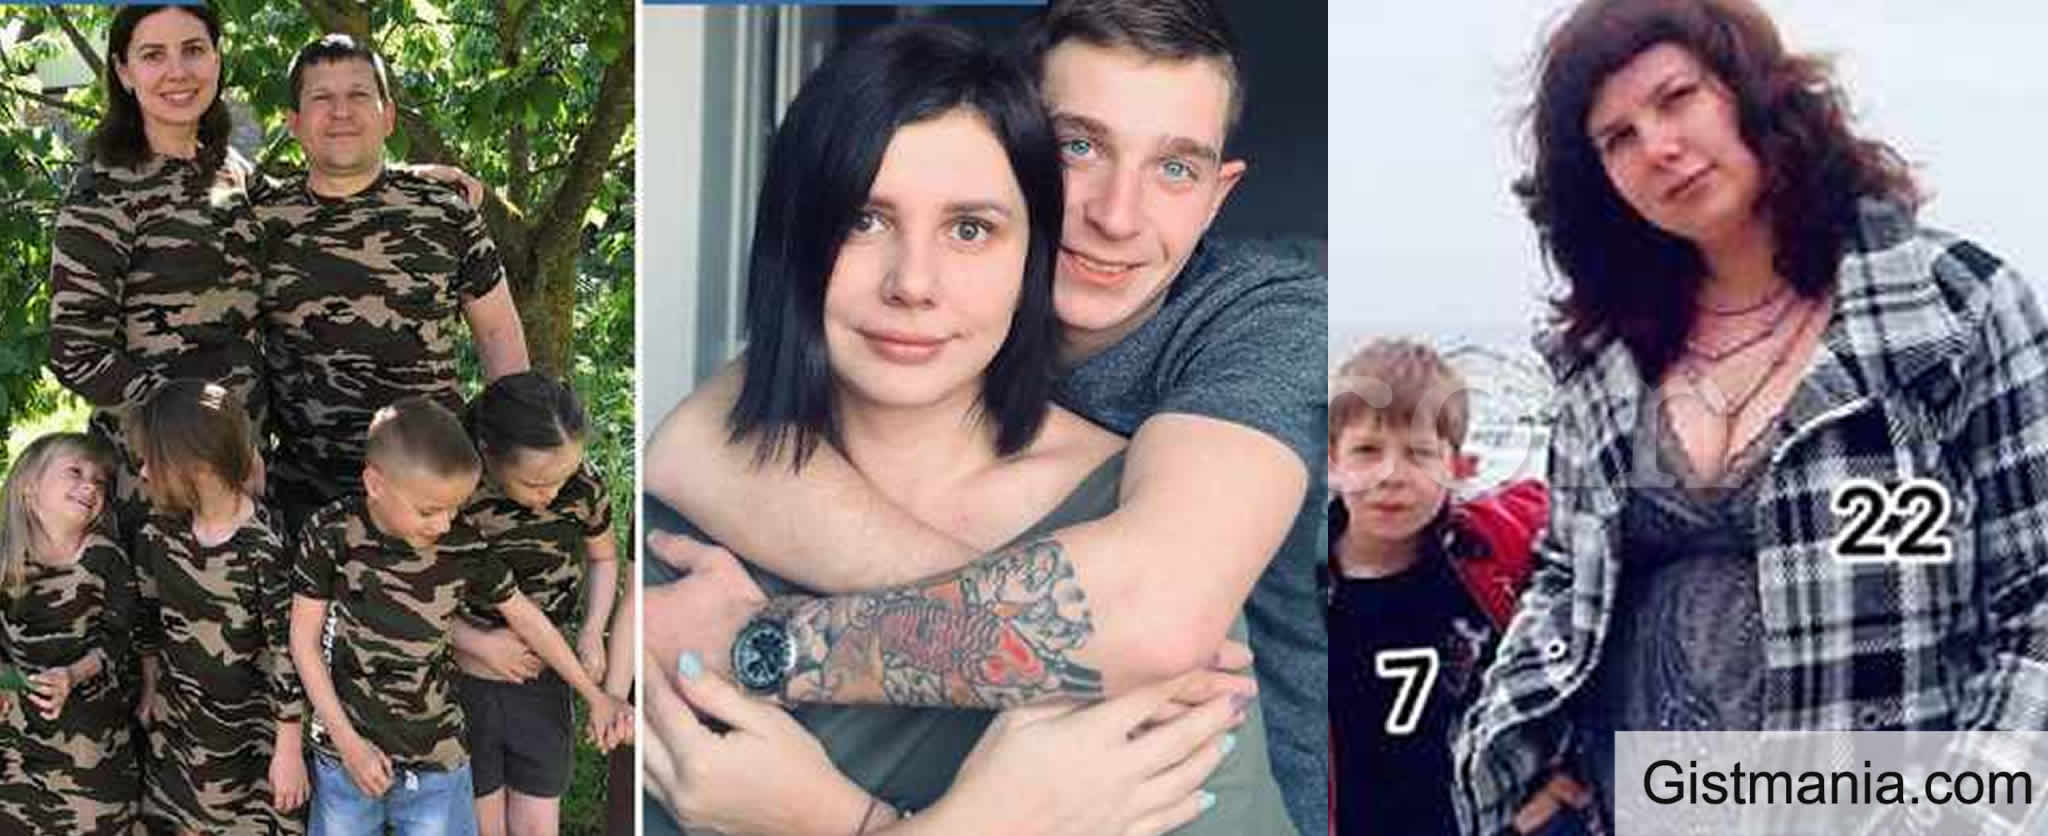 35 Yr Old Russian Influencer Marina Reveals Her Upcoming Marriage To 20 Yr Old Stepson Gistmania